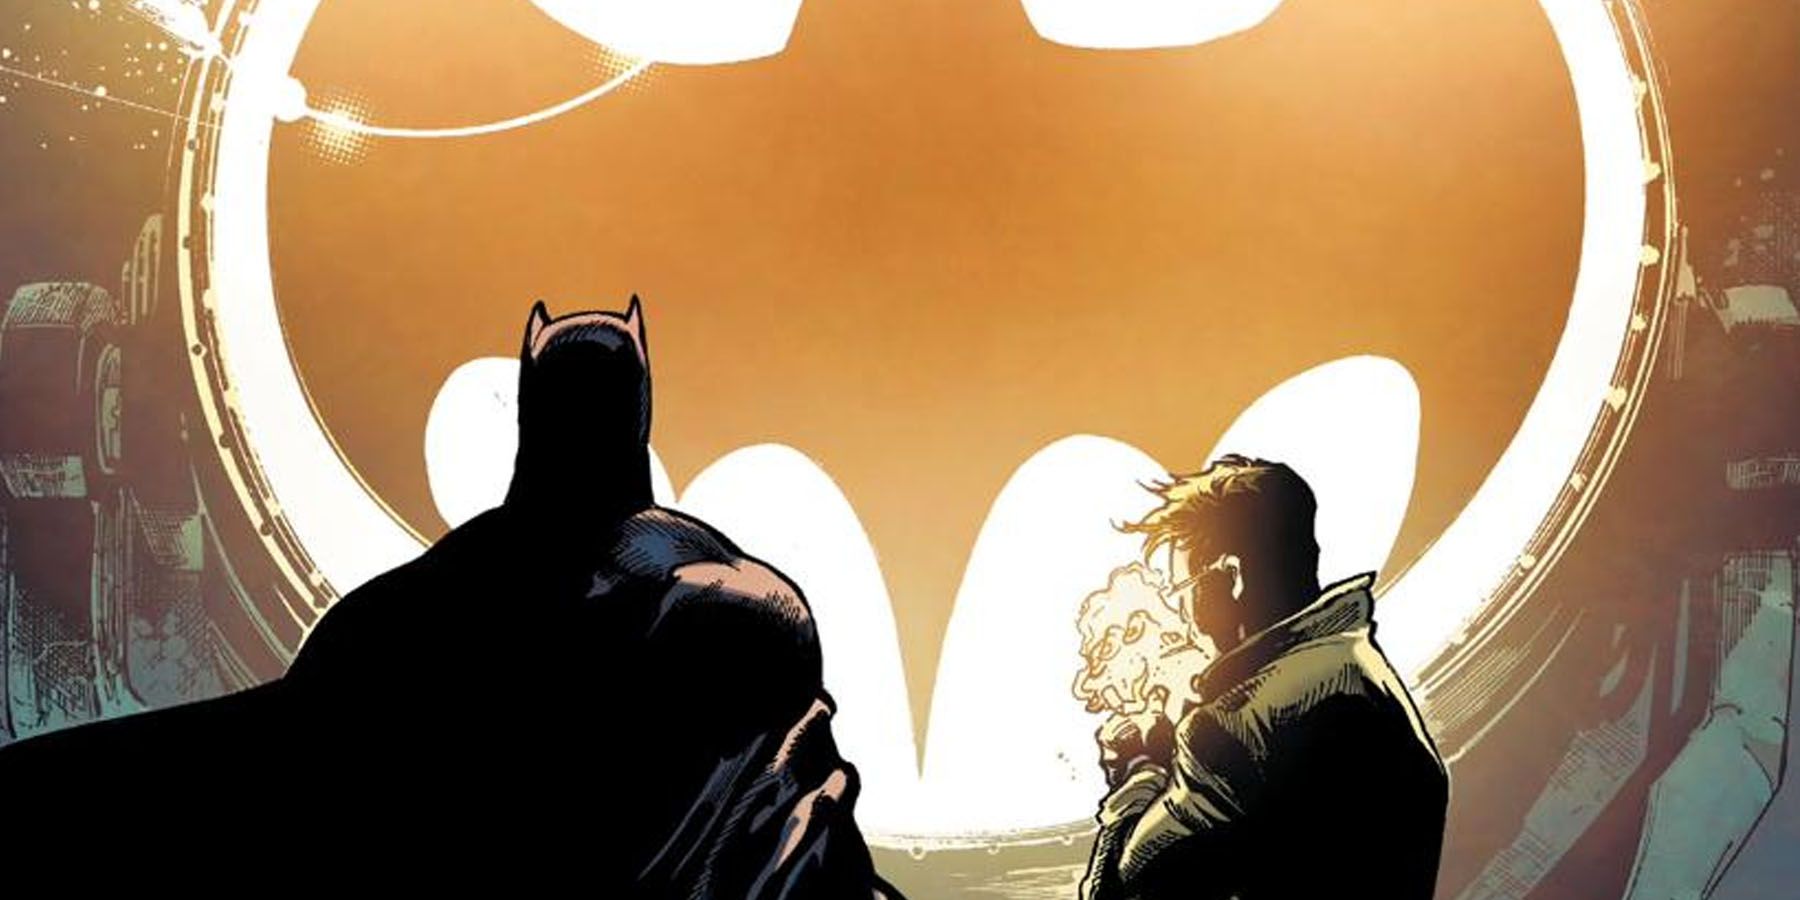 Batman: 10 Weird Things You Might Not Know About The Bat Signal